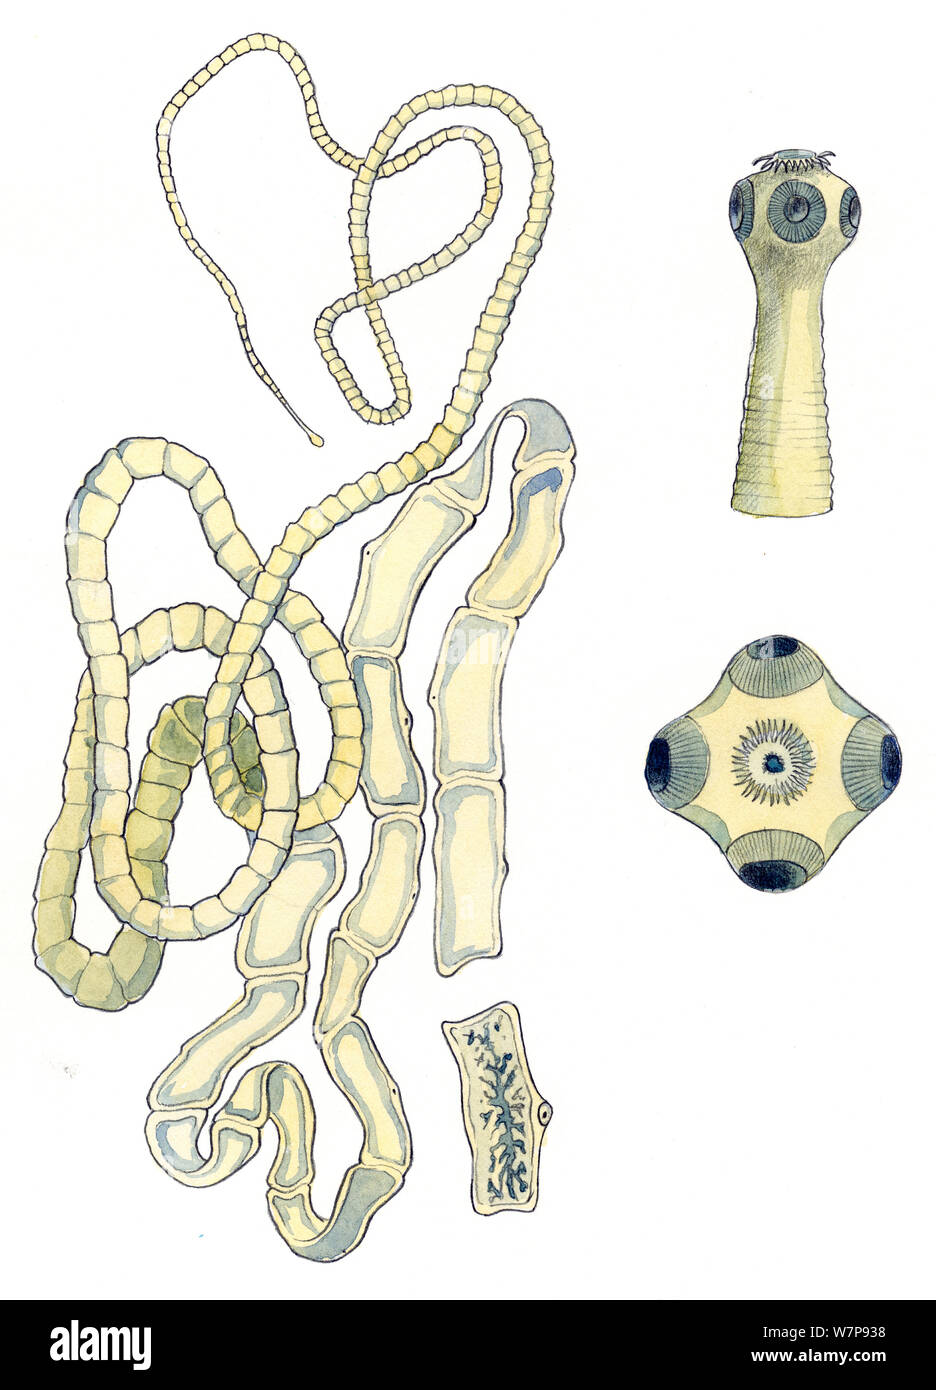 Illustrations of pork tape worm (Taenia solium) with segmented body on the left, cross section of proglottid or body segment on the bottom middle and on the left illustrations of scolex or head. Pencil and watercolor painting. Stock Photo